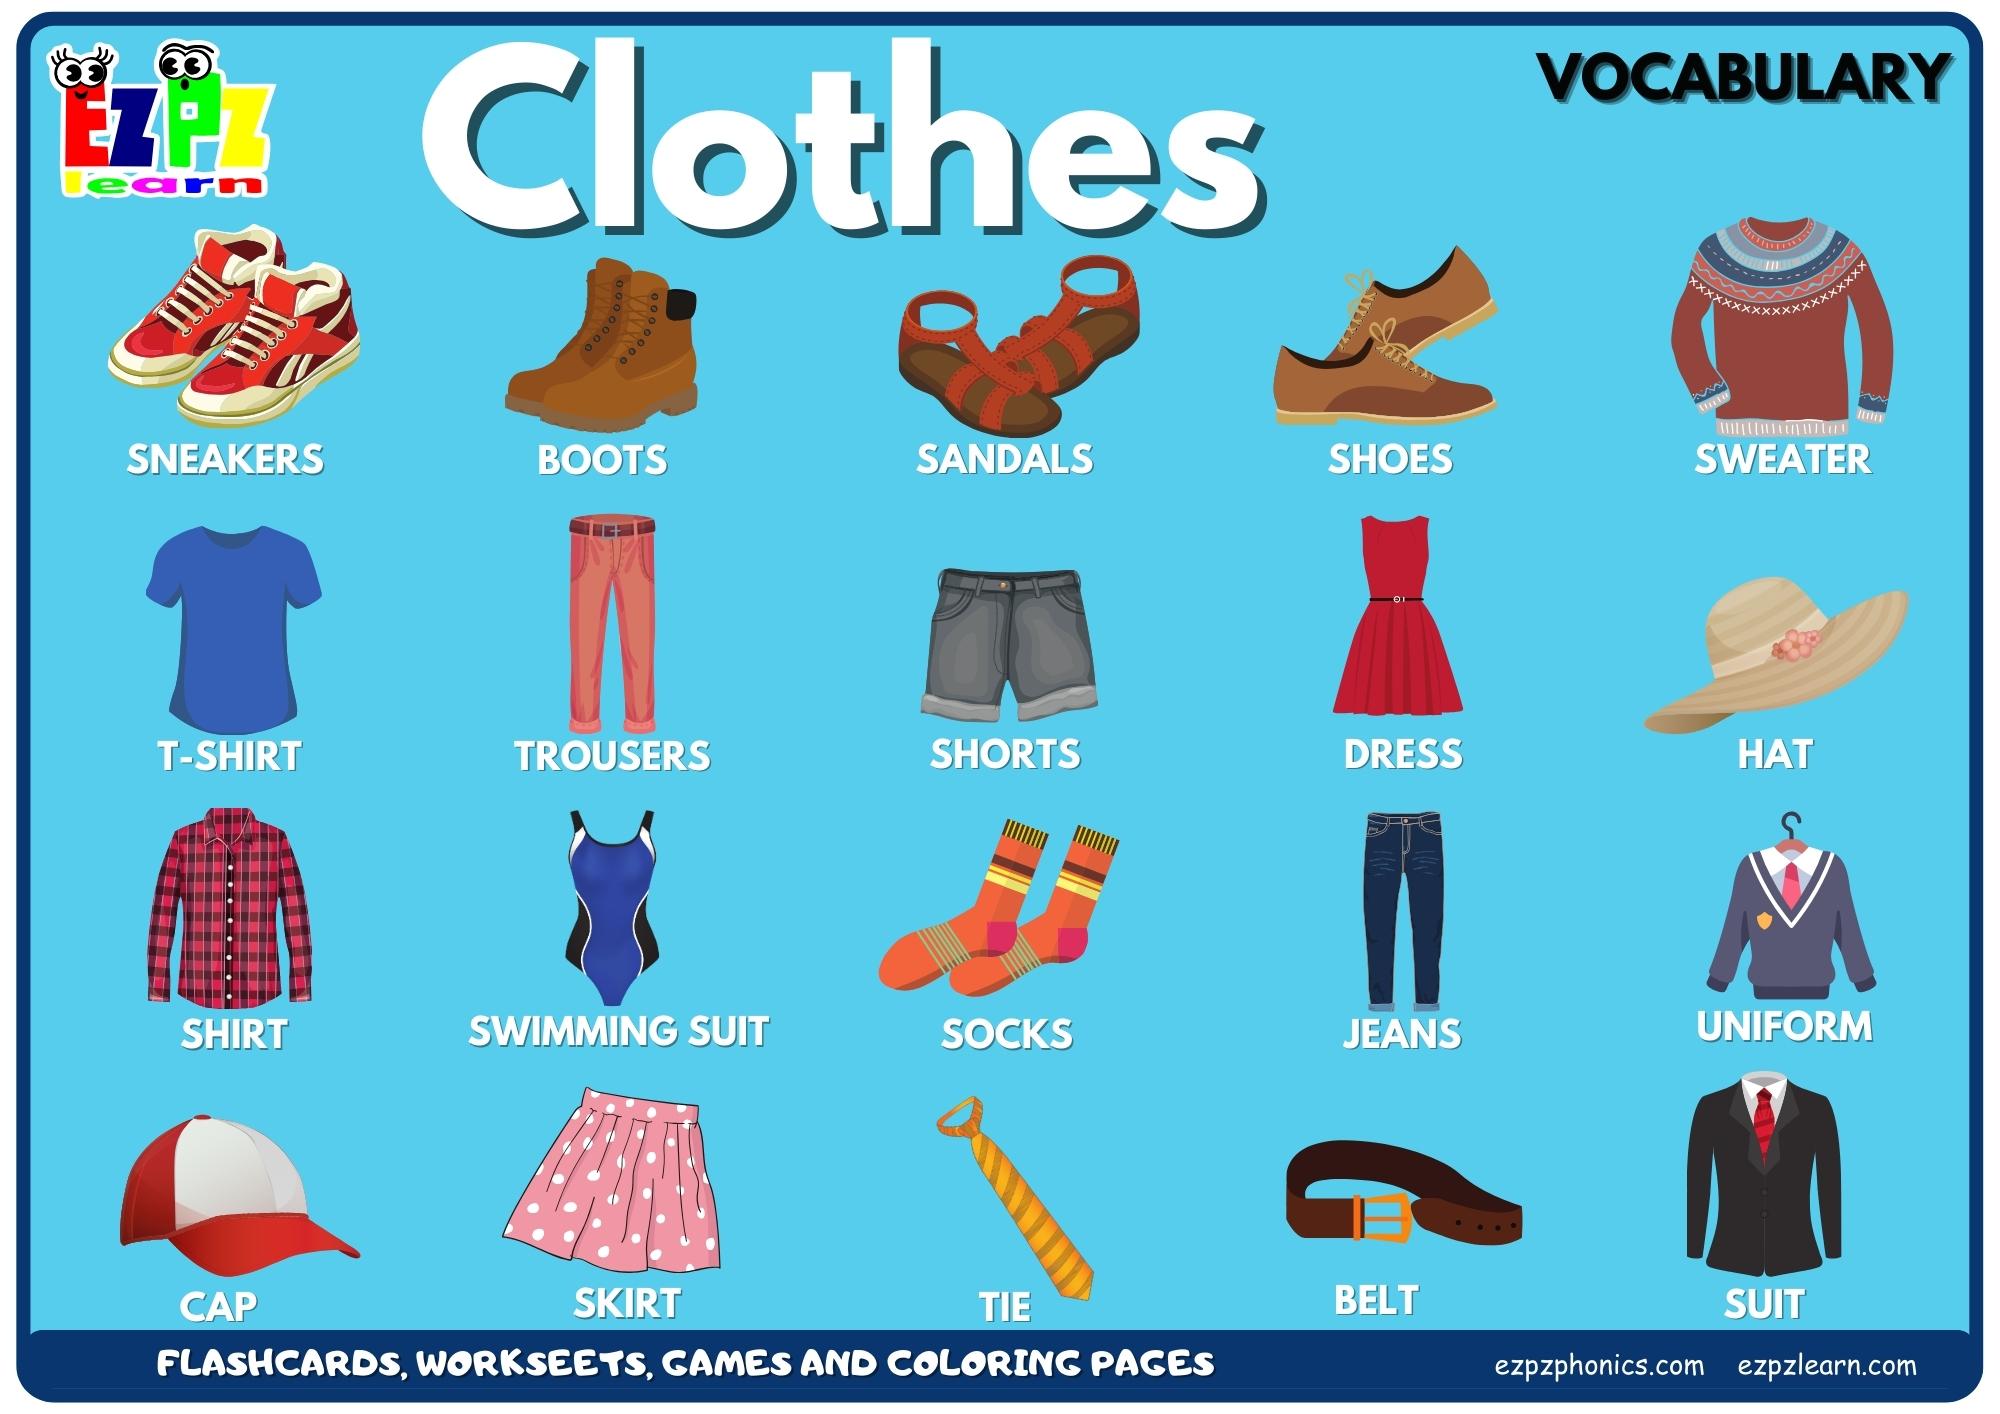 CLOTHING VOCABULARY for Beginners, Kids with Emojis - Learn Names